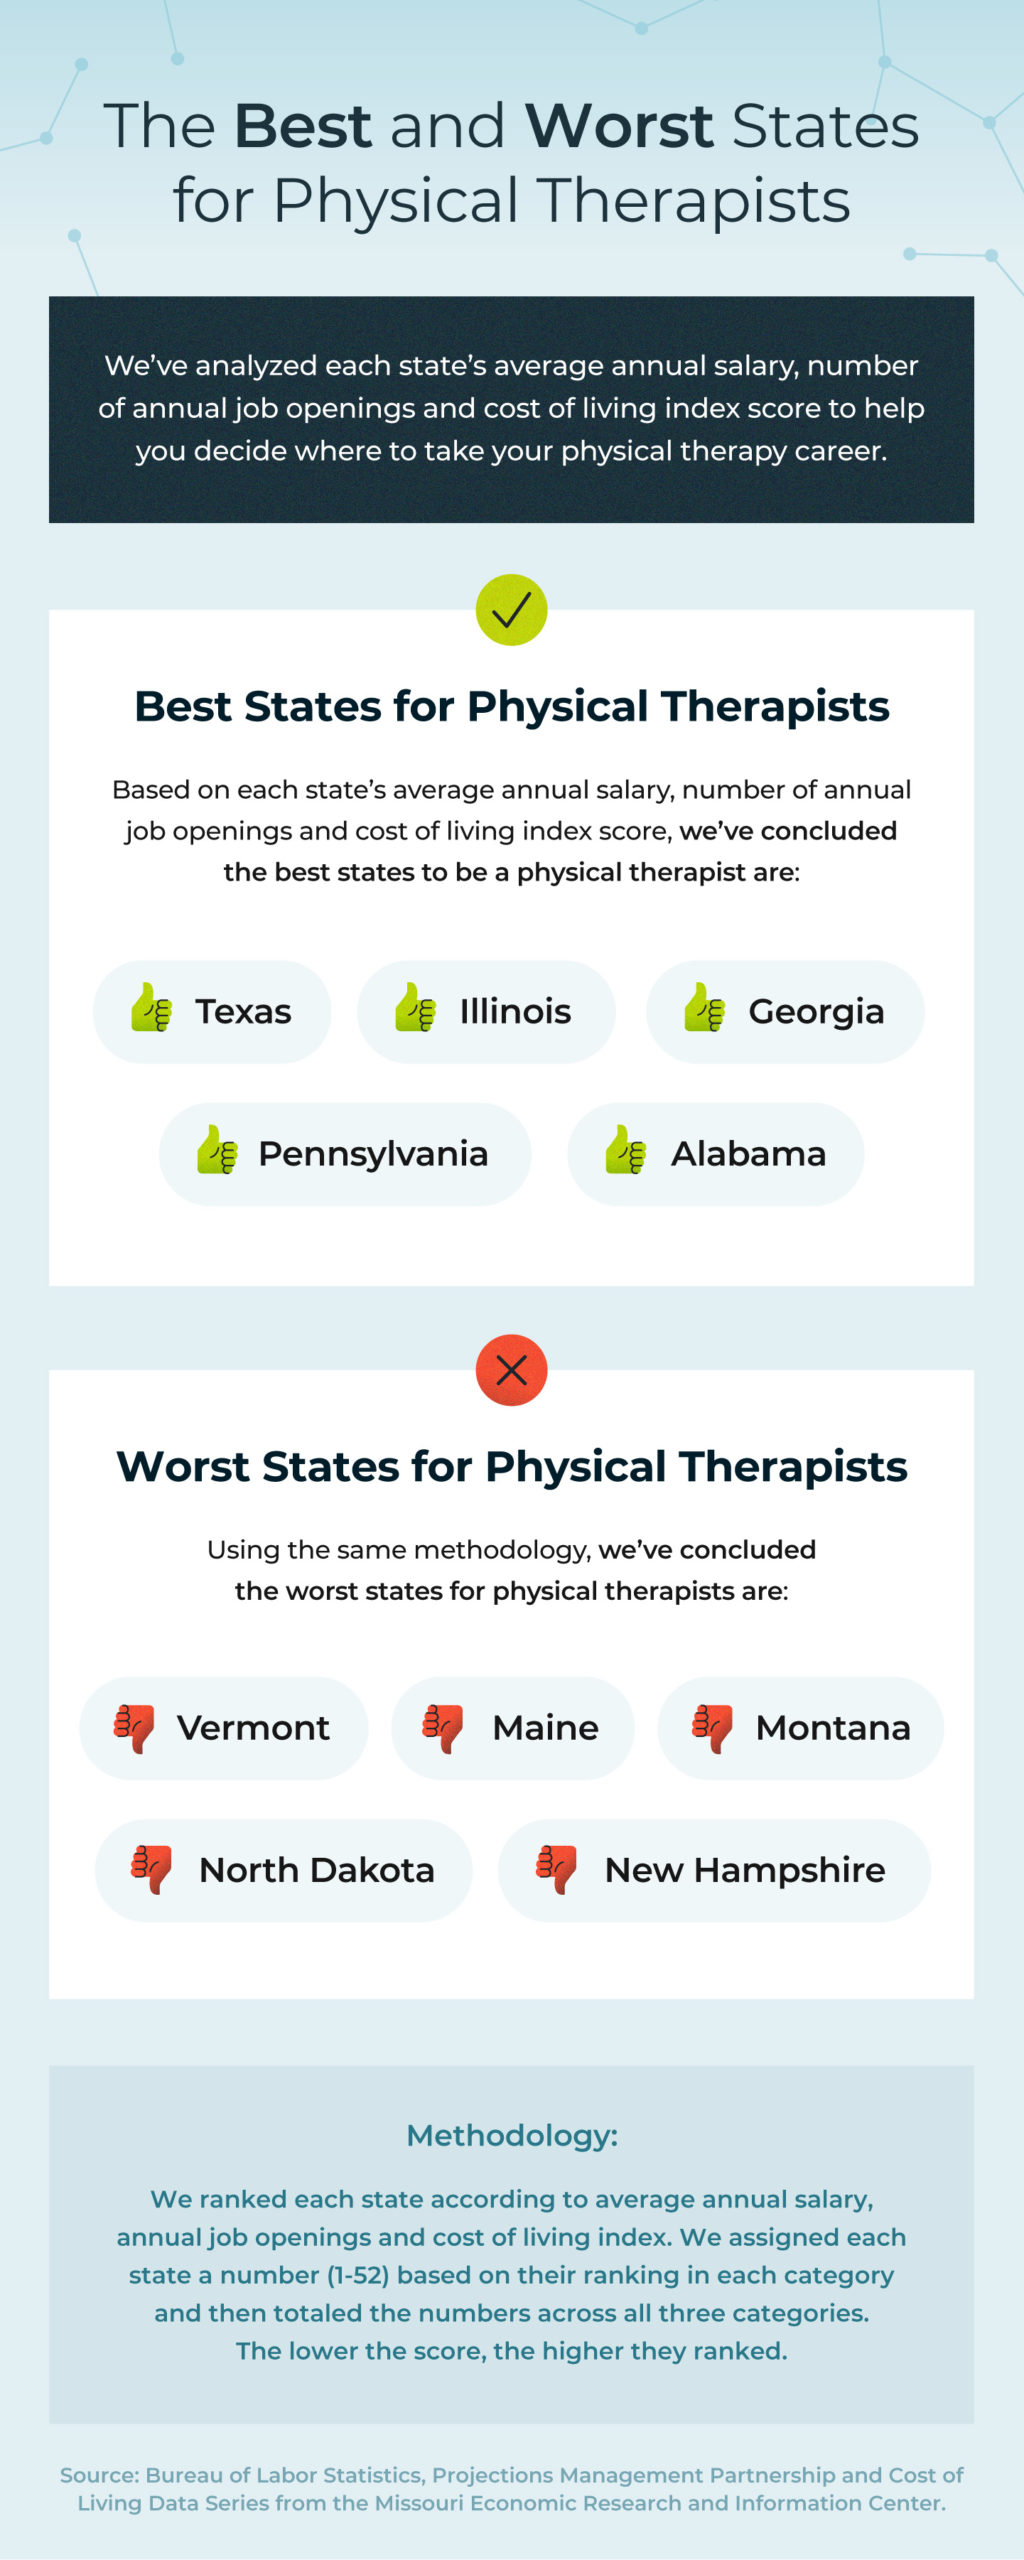 Best and worst states for physical therapists based on average annual salary, number of annual job openings and cost of living index.